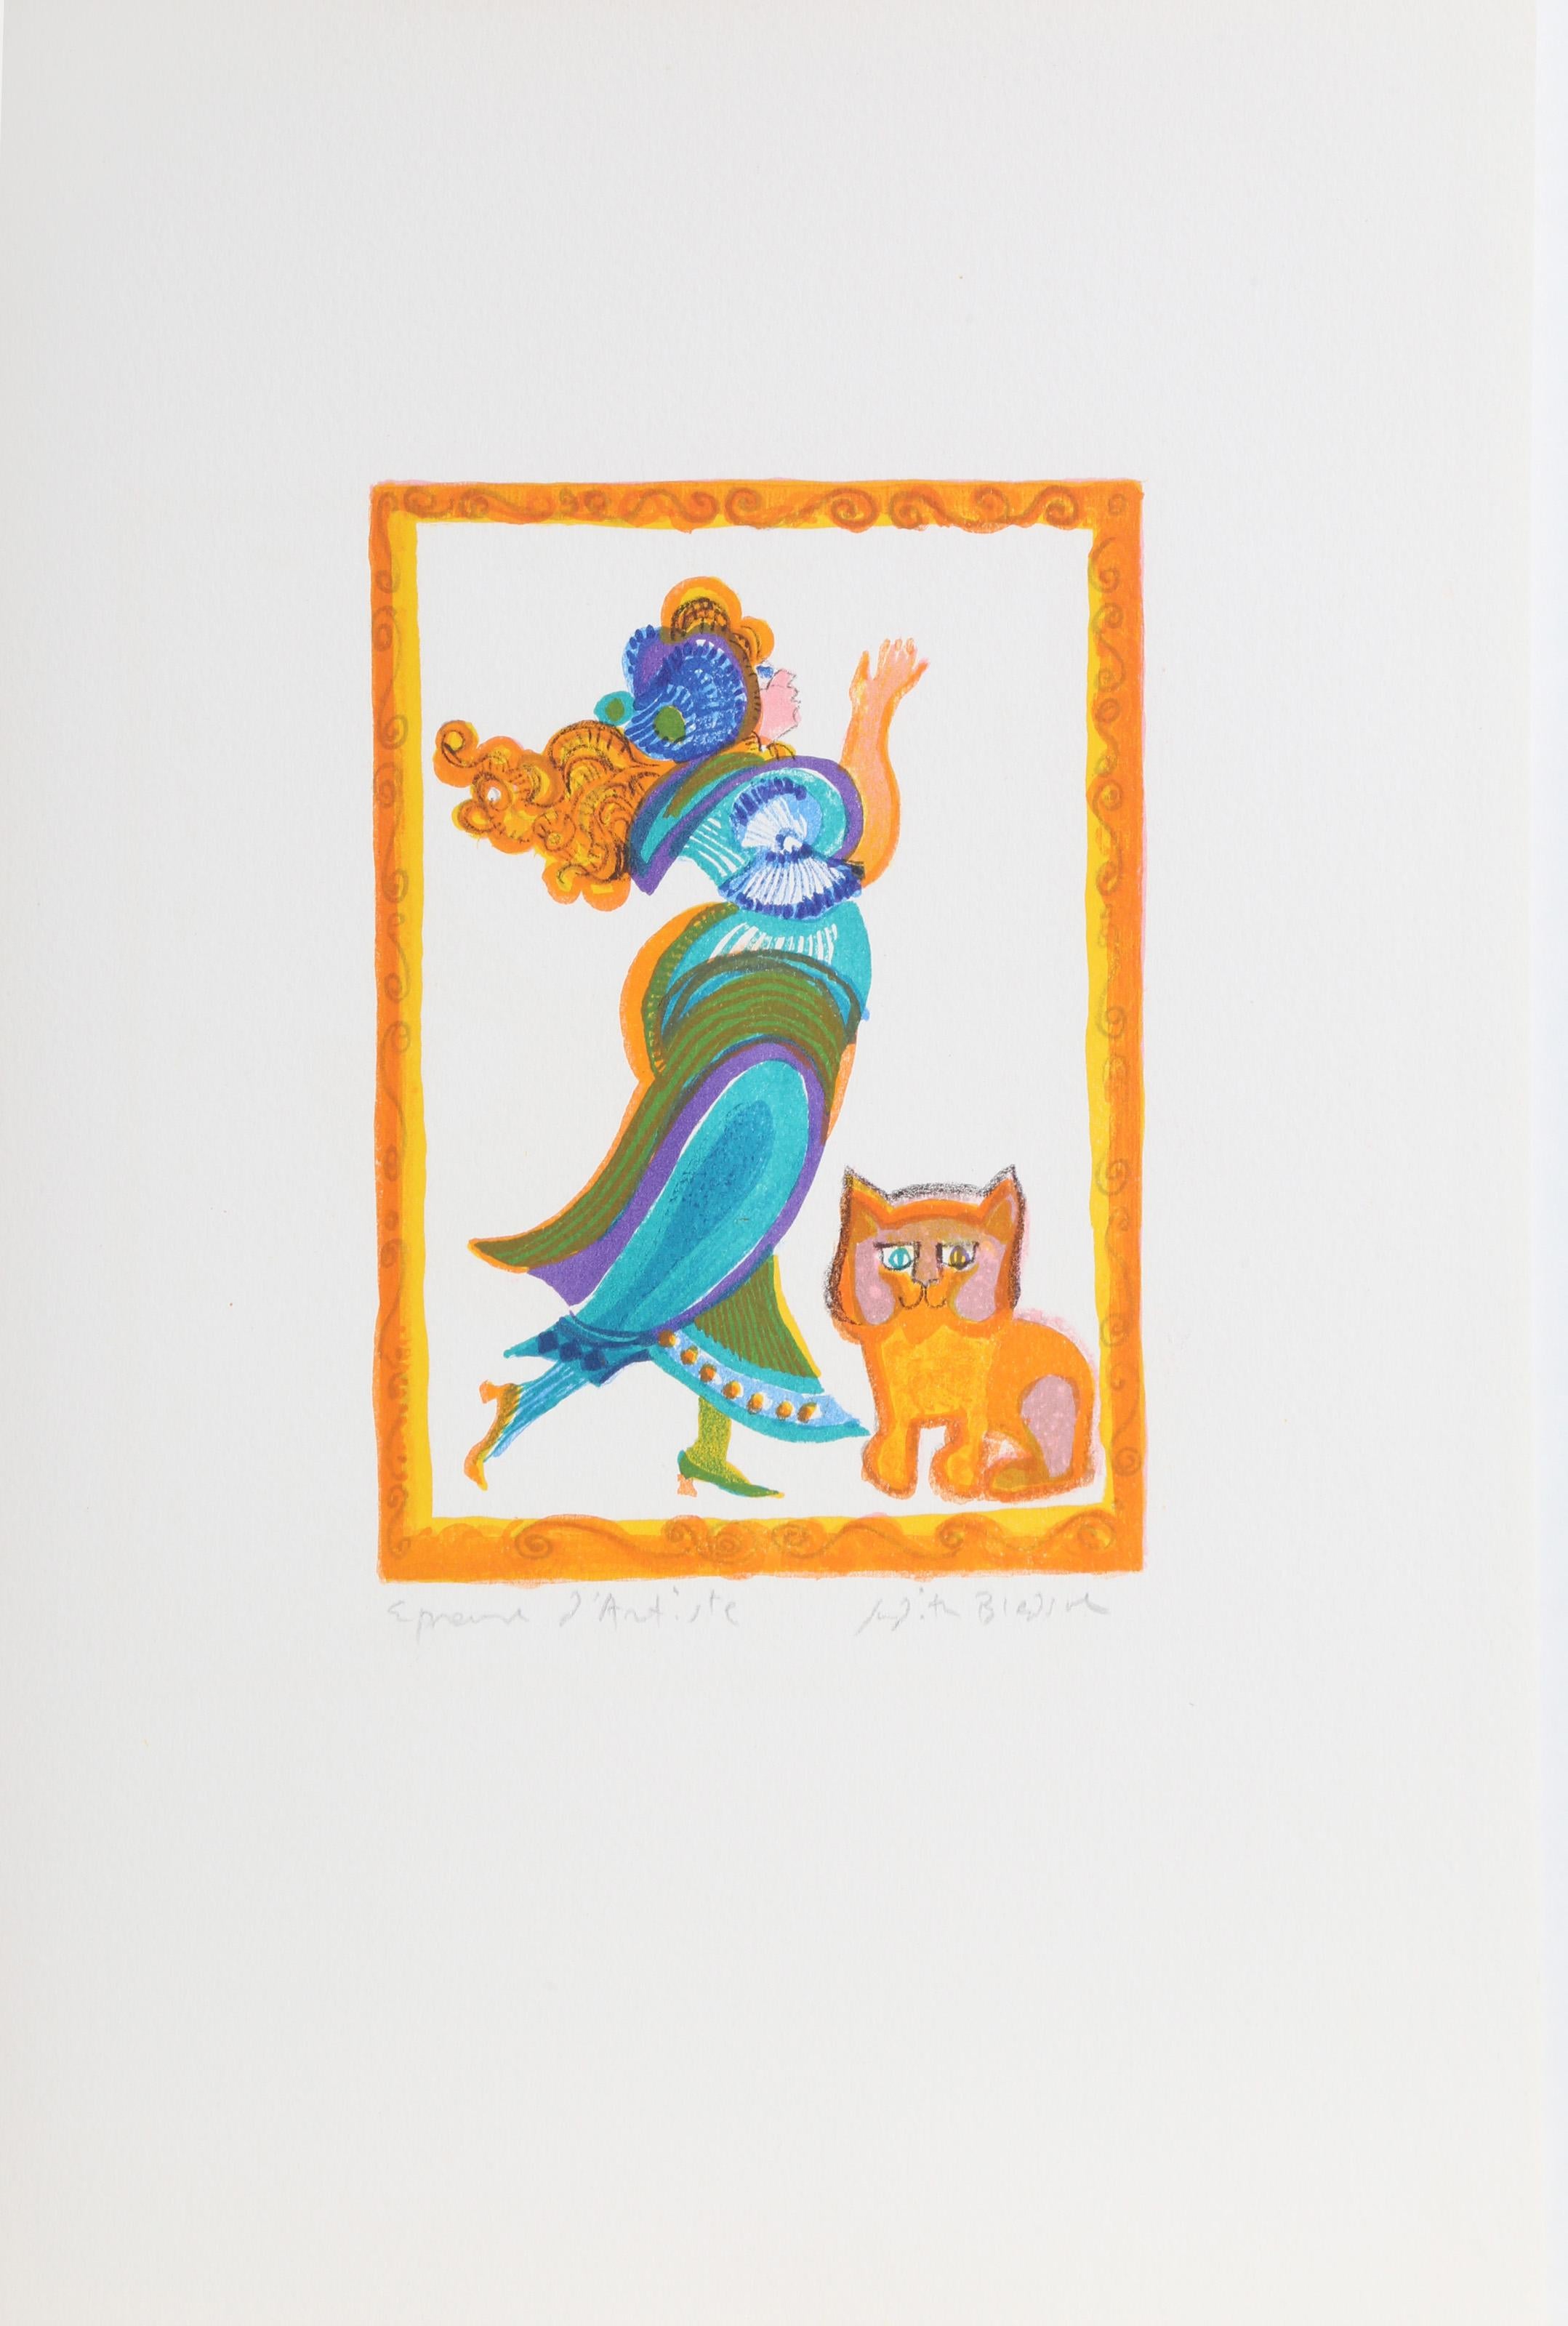 Judith Bledsoe, American (1938 - 2013) -  Petite Portrait - Woman in Gown with Cat. Year: circa 1974, Medium: Lithograph, signed in pencil, Edition: EA, Image Size: 8 x 6 inches, Size: 15  x 10.5 in. (38.1  x 26.67 cm), Description: Sashaying away